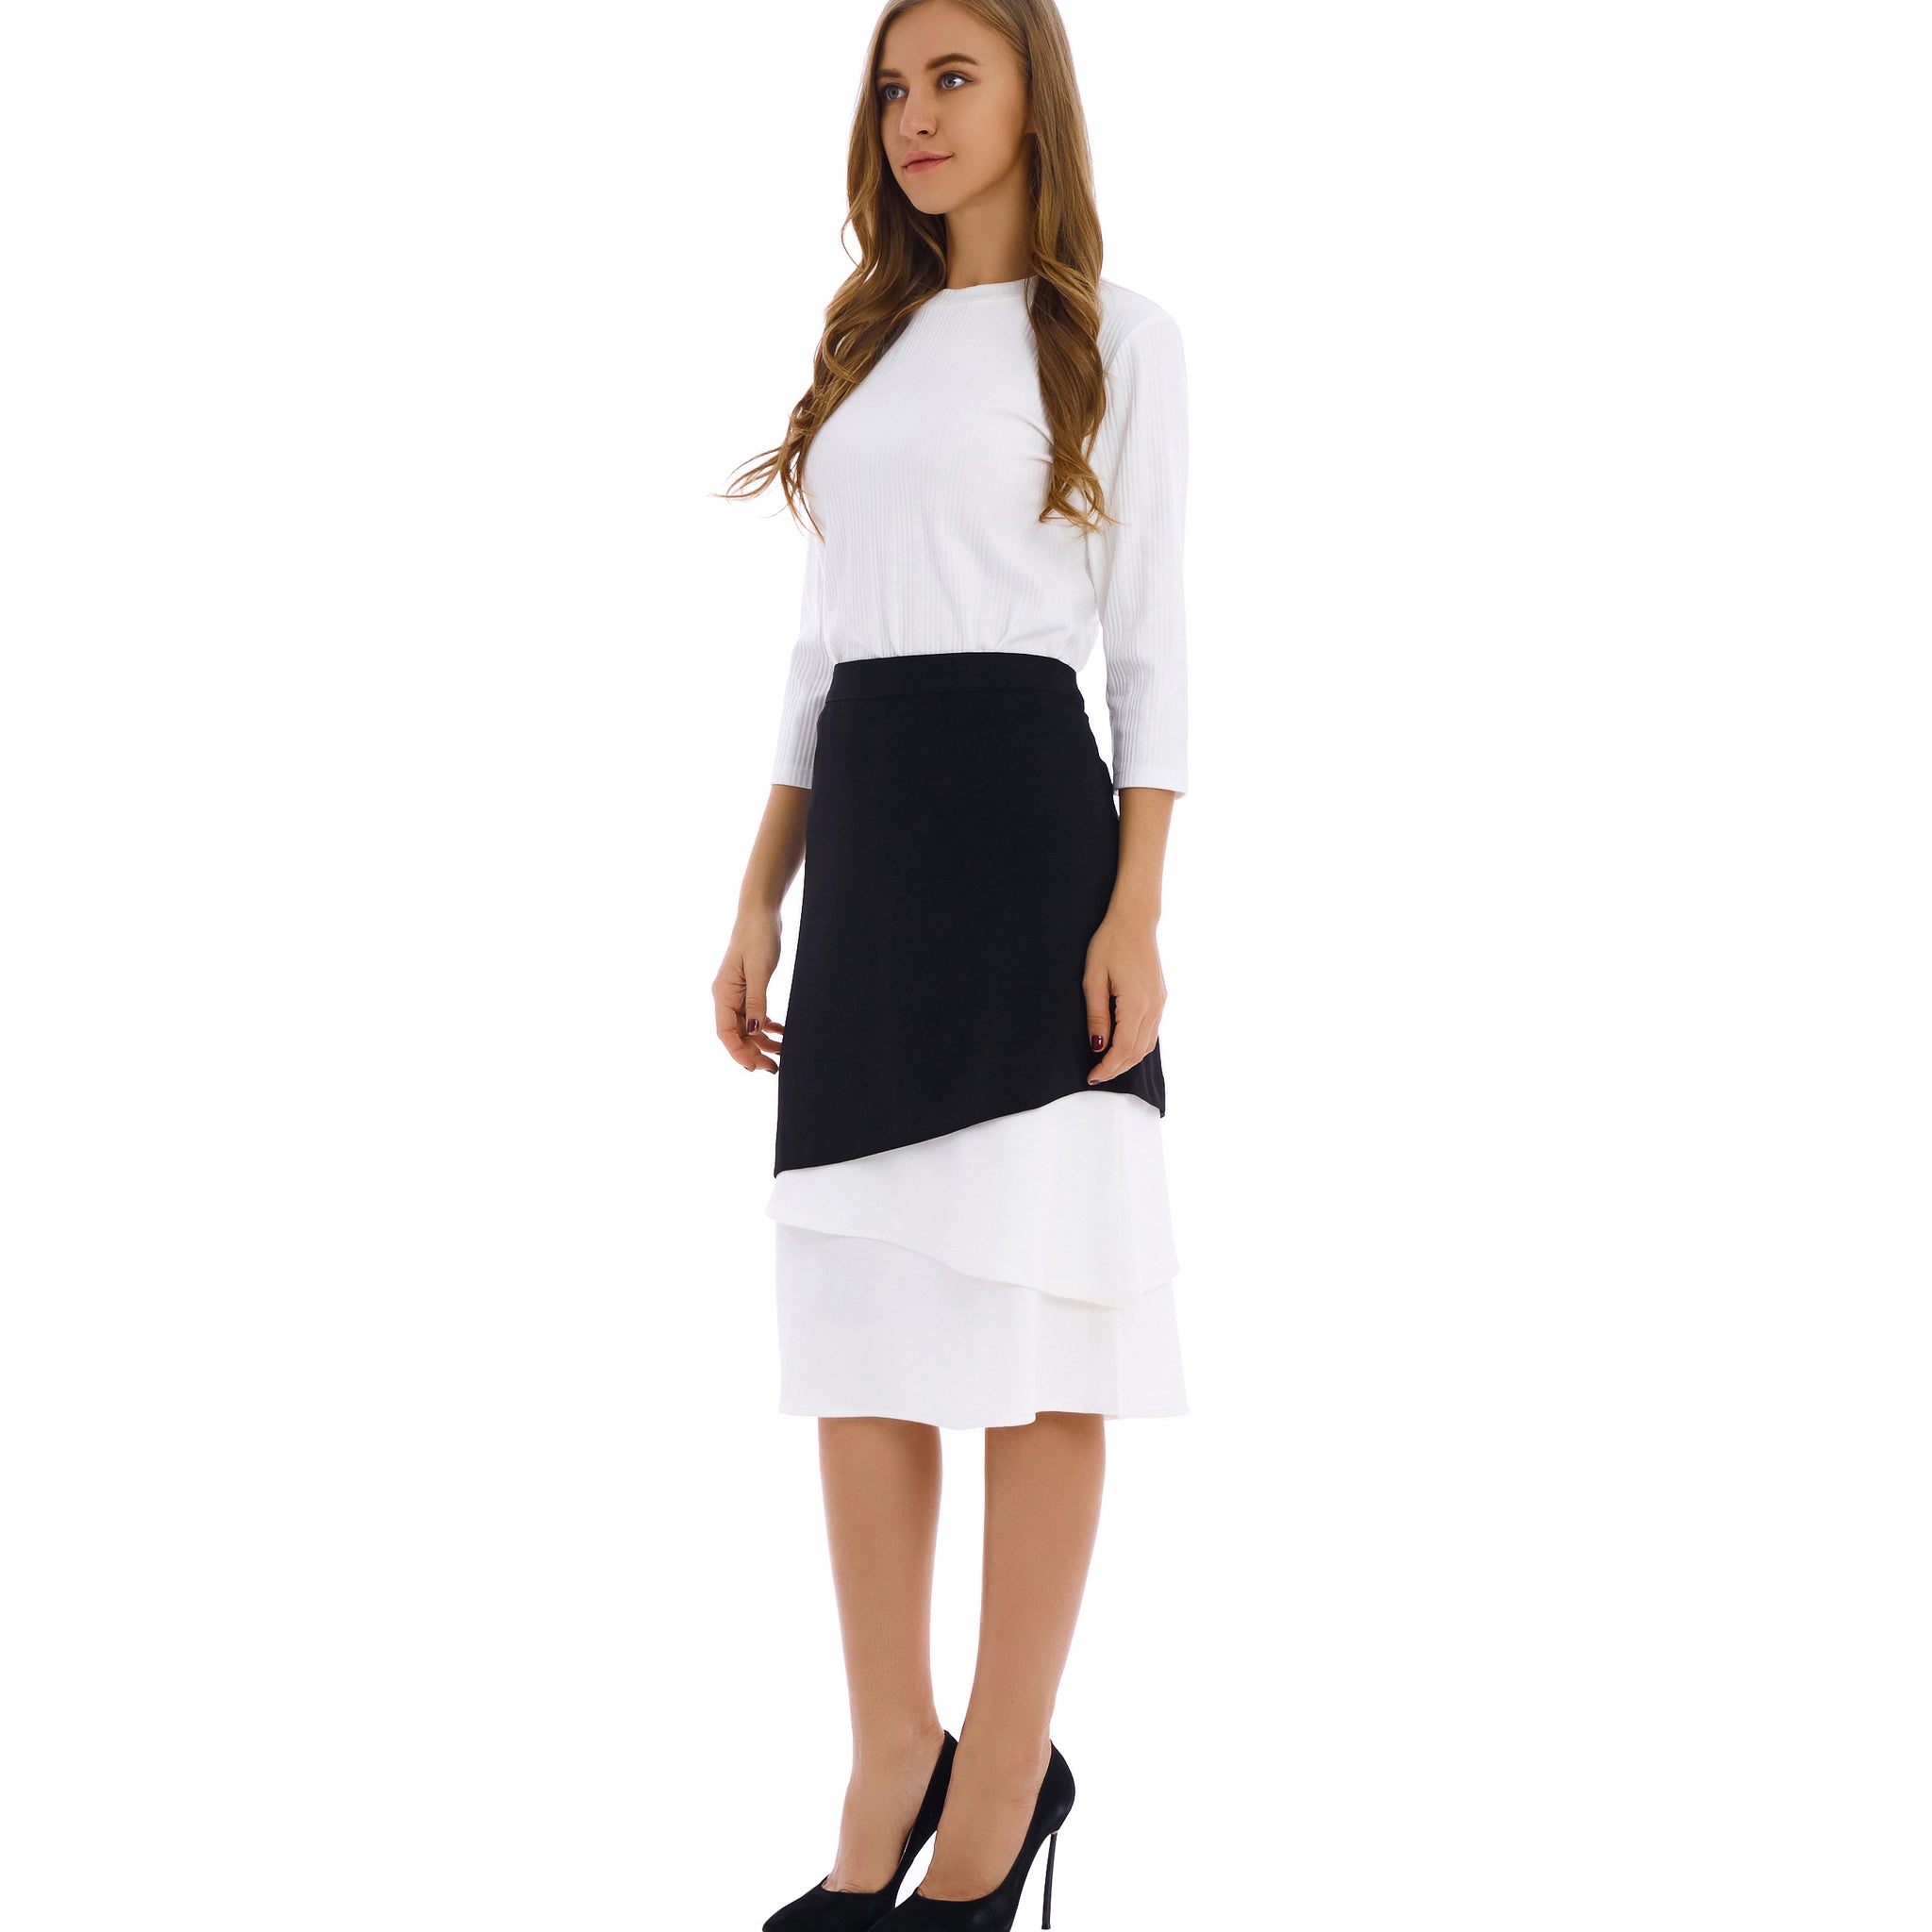 Miss Finch NYC Modest Contrast White Fabric Midi Skirt 2794W